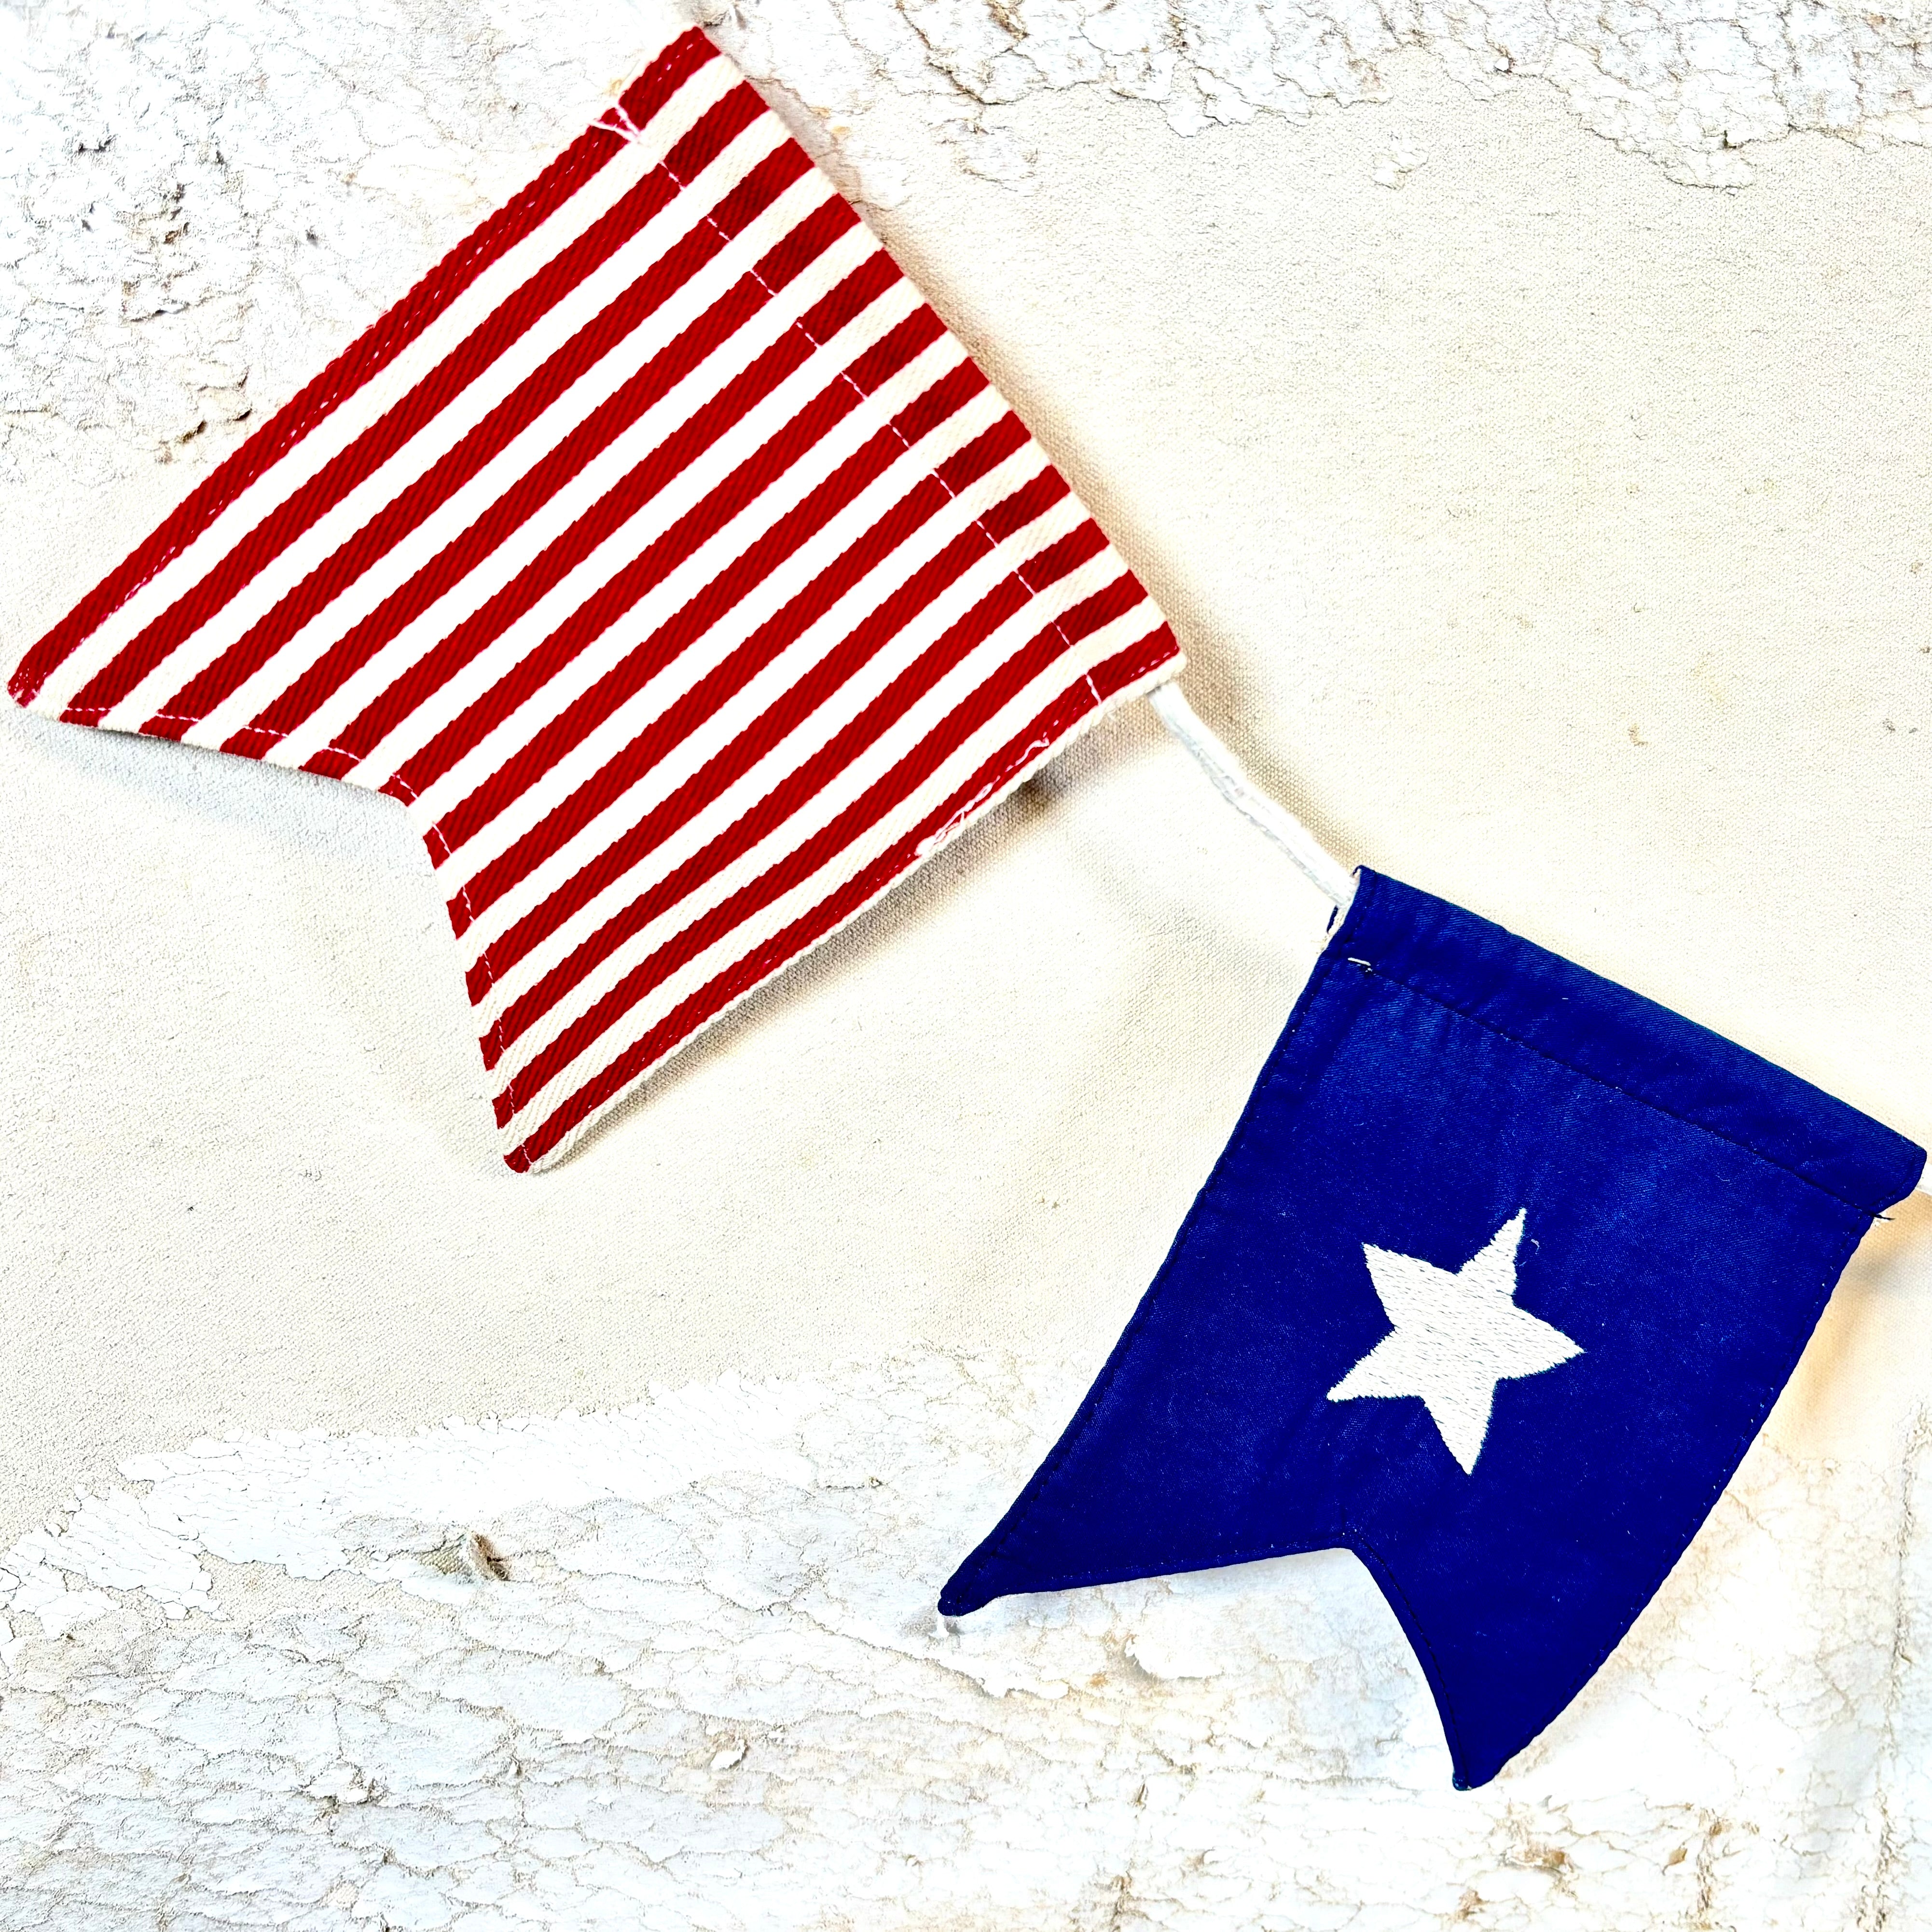 Canvas Bunting Flags Red White Blue